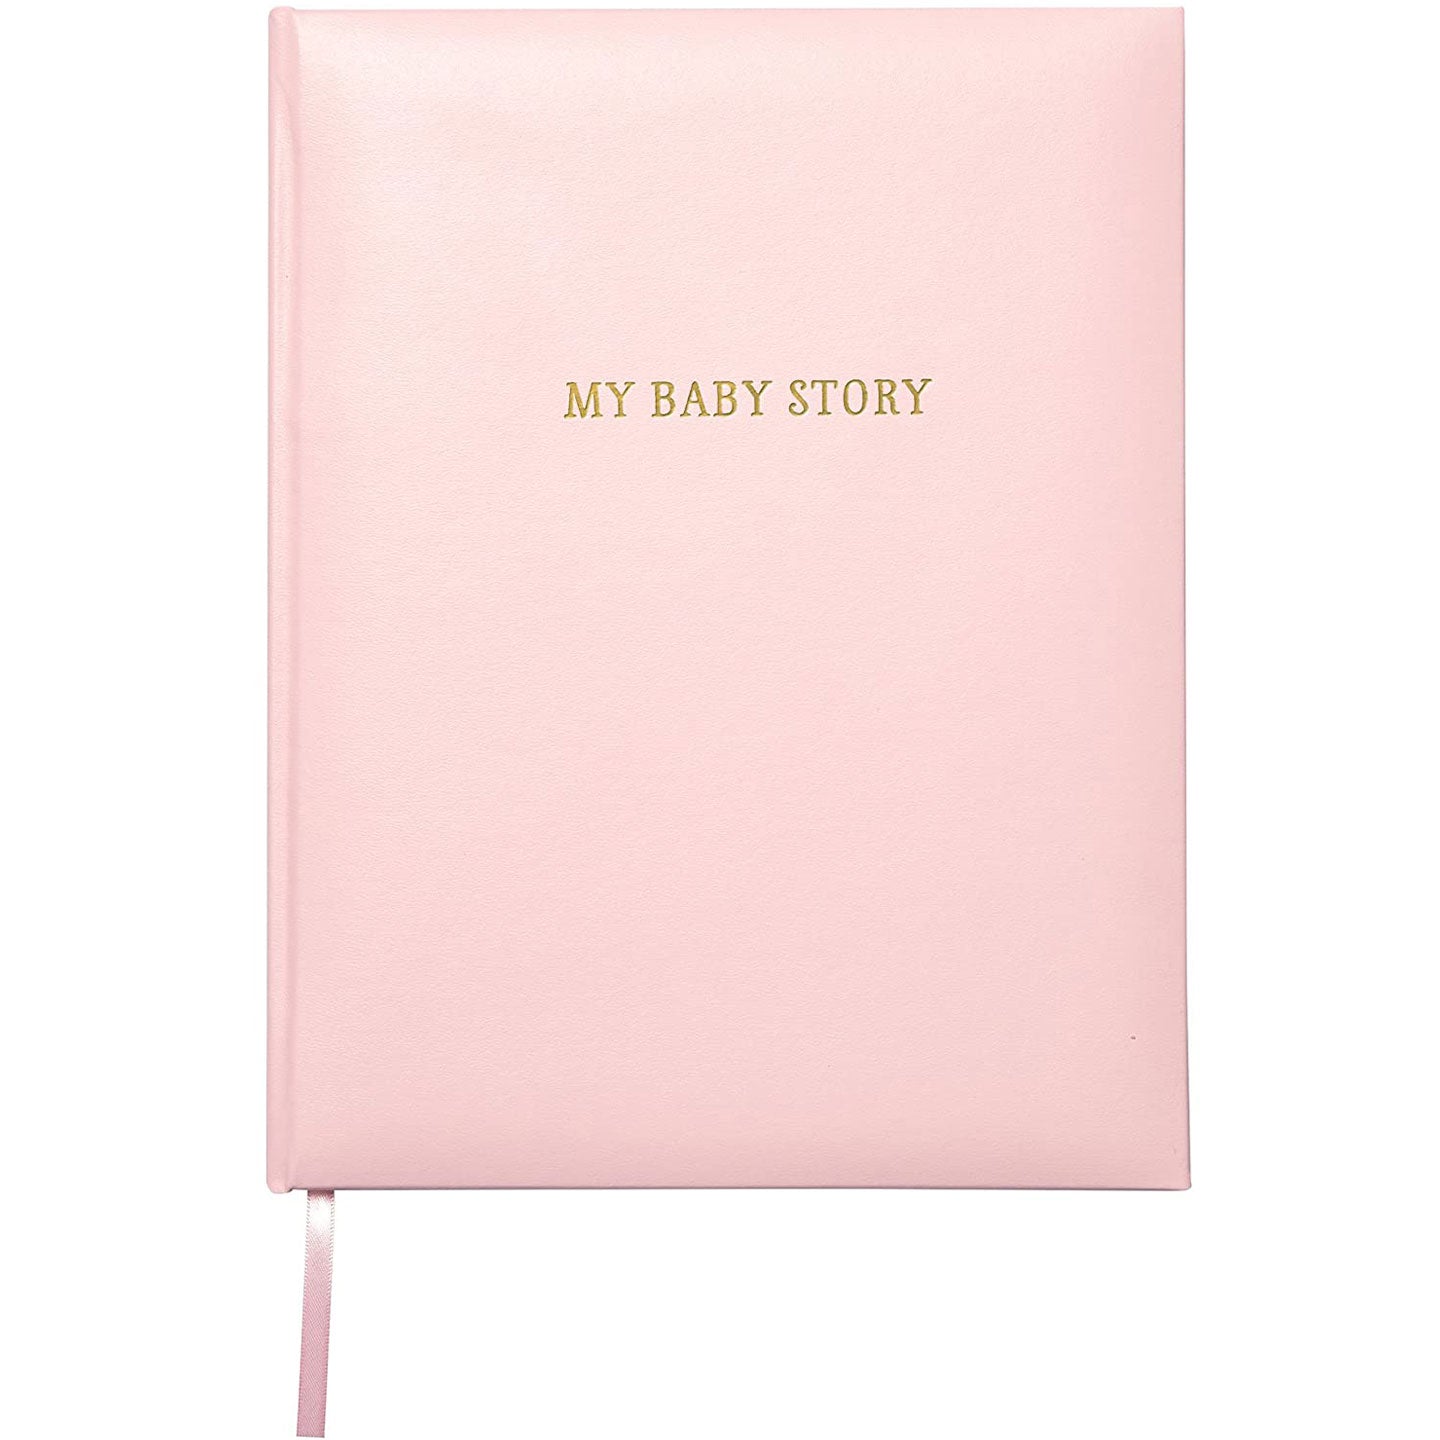 My Baby Story Pink Leather Memory Book